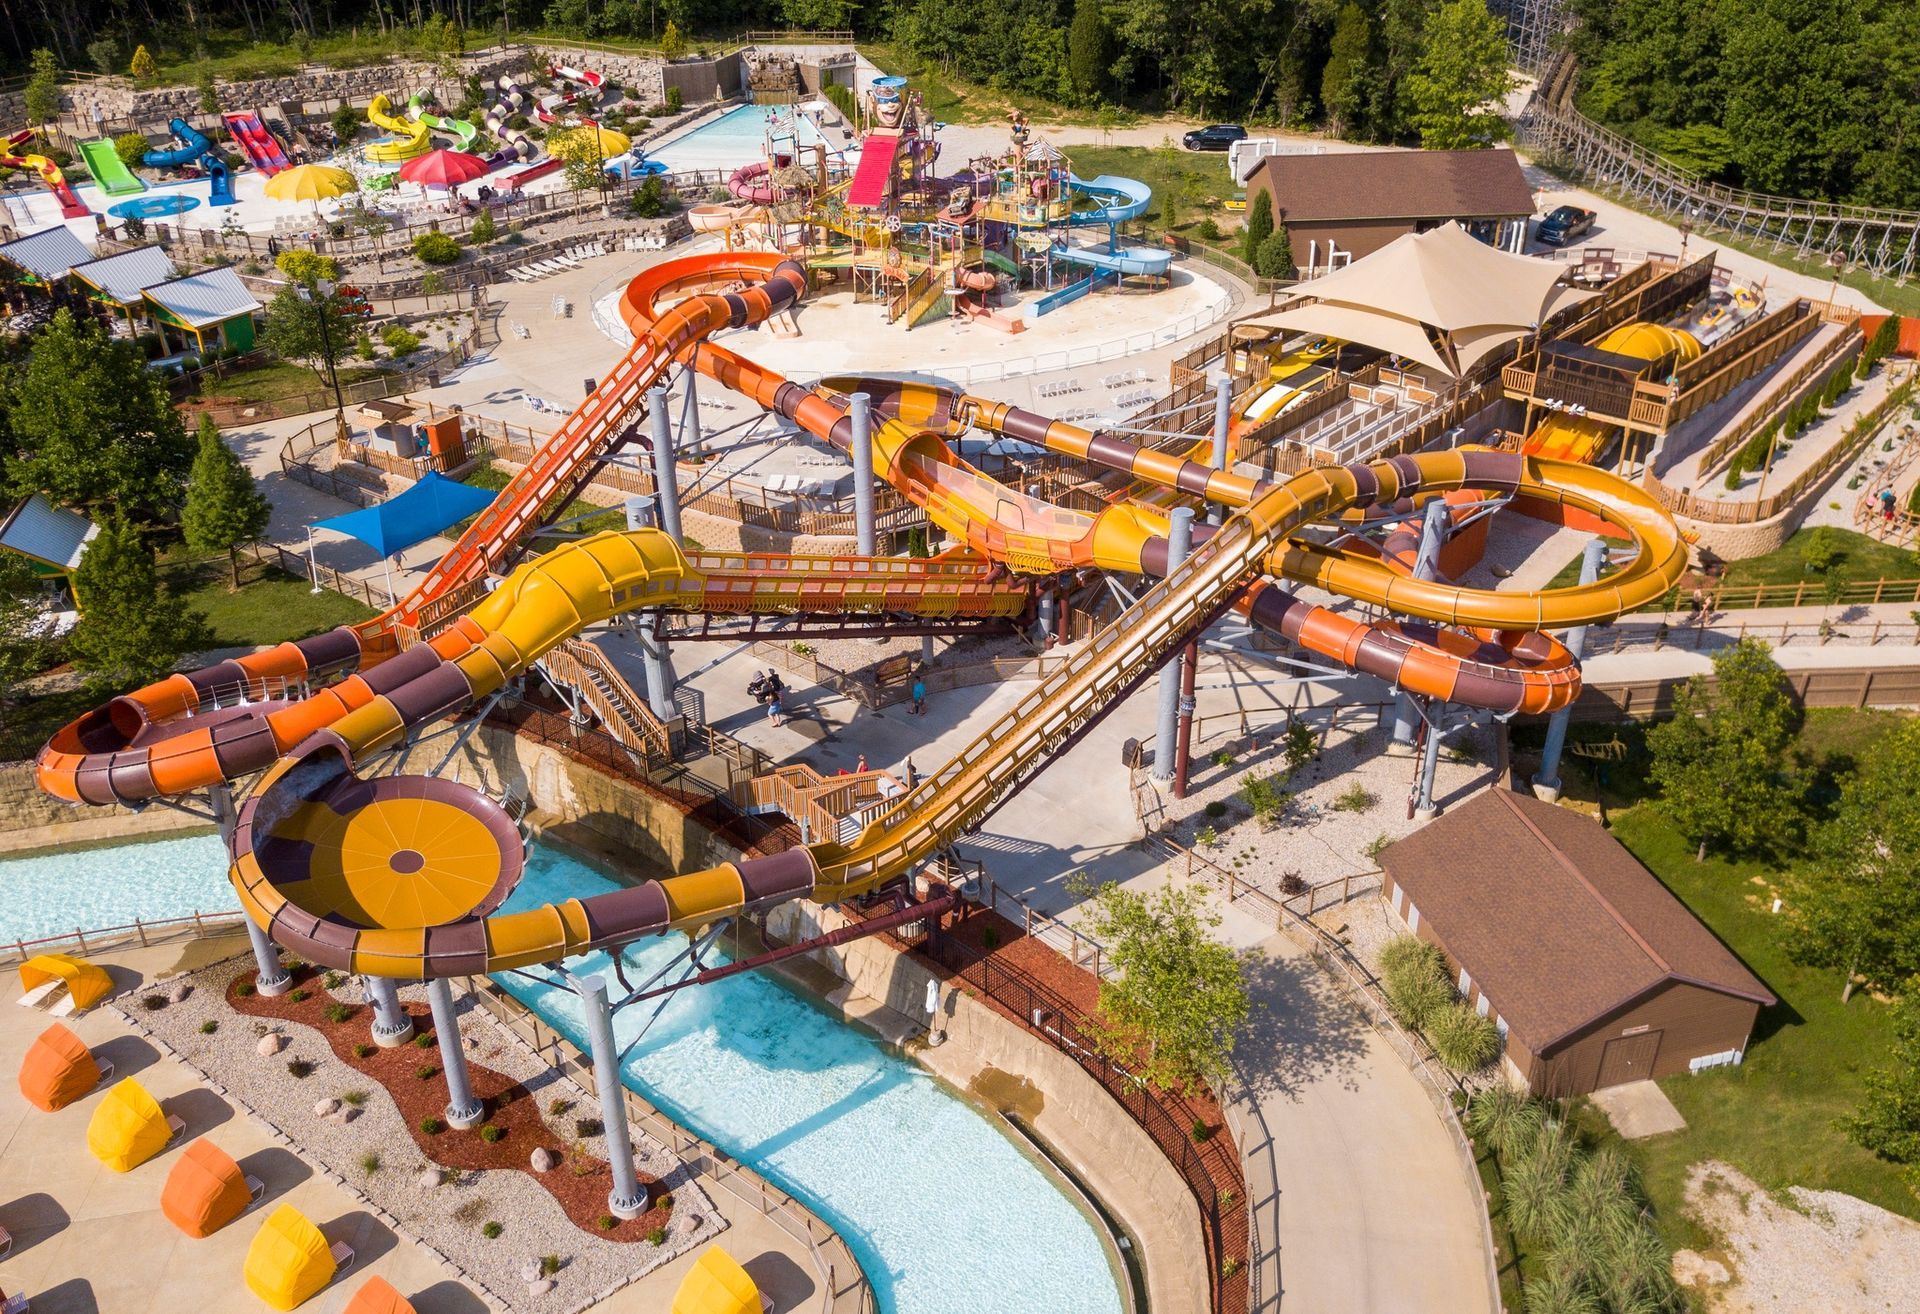 World's Longest Water Coaster: world record in Santa Claus, Indiana